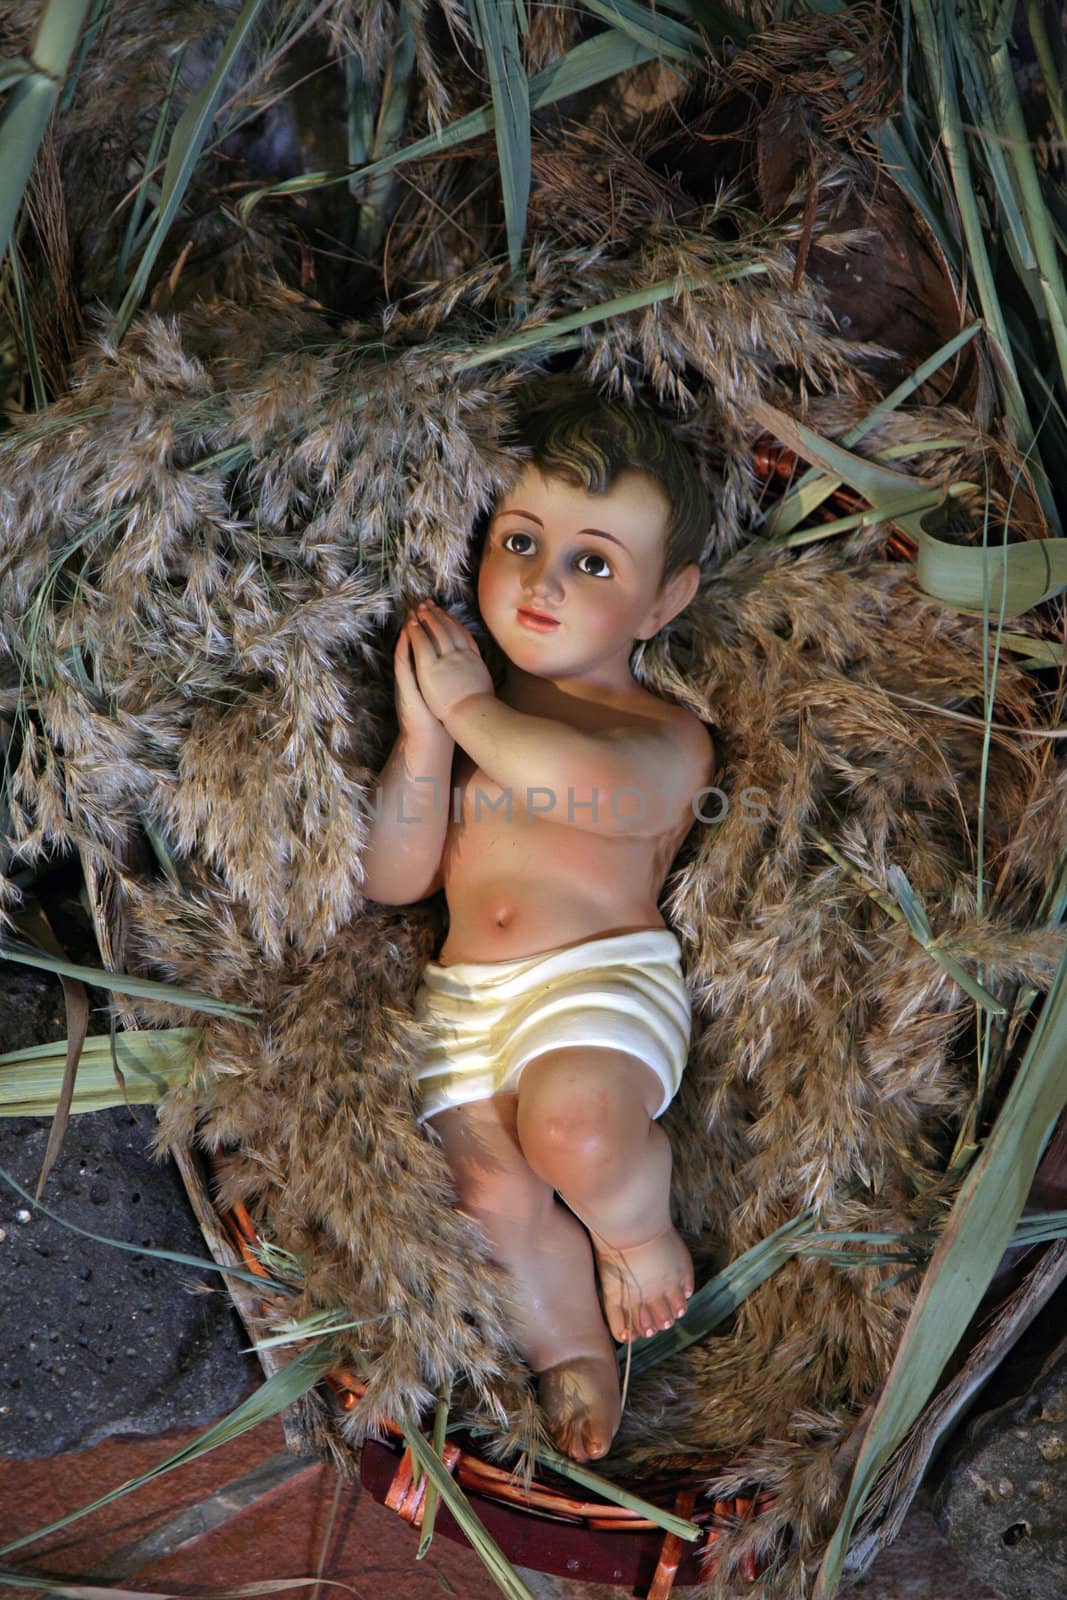 A baby Jesus figure on Christmas, Tabgha-Church of St. Peter's Primacy